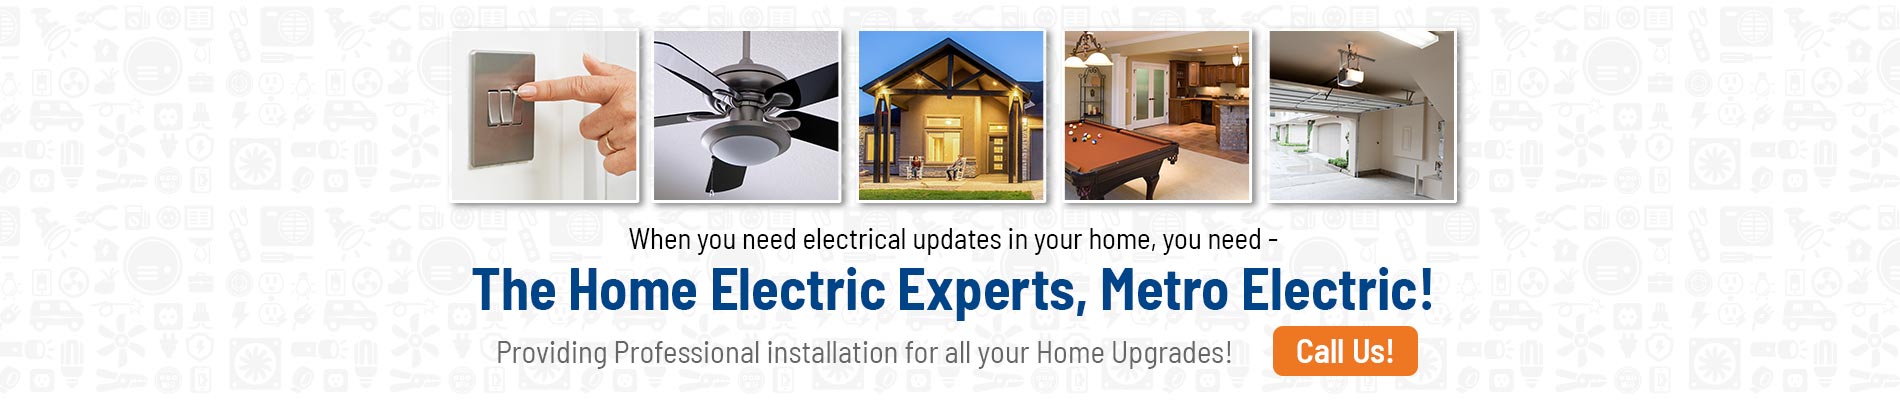 When you need electrical updates in your home, you need - The Home Electric Experts, Metro Electric! Providing Professional installation for all your Home Upgrades!